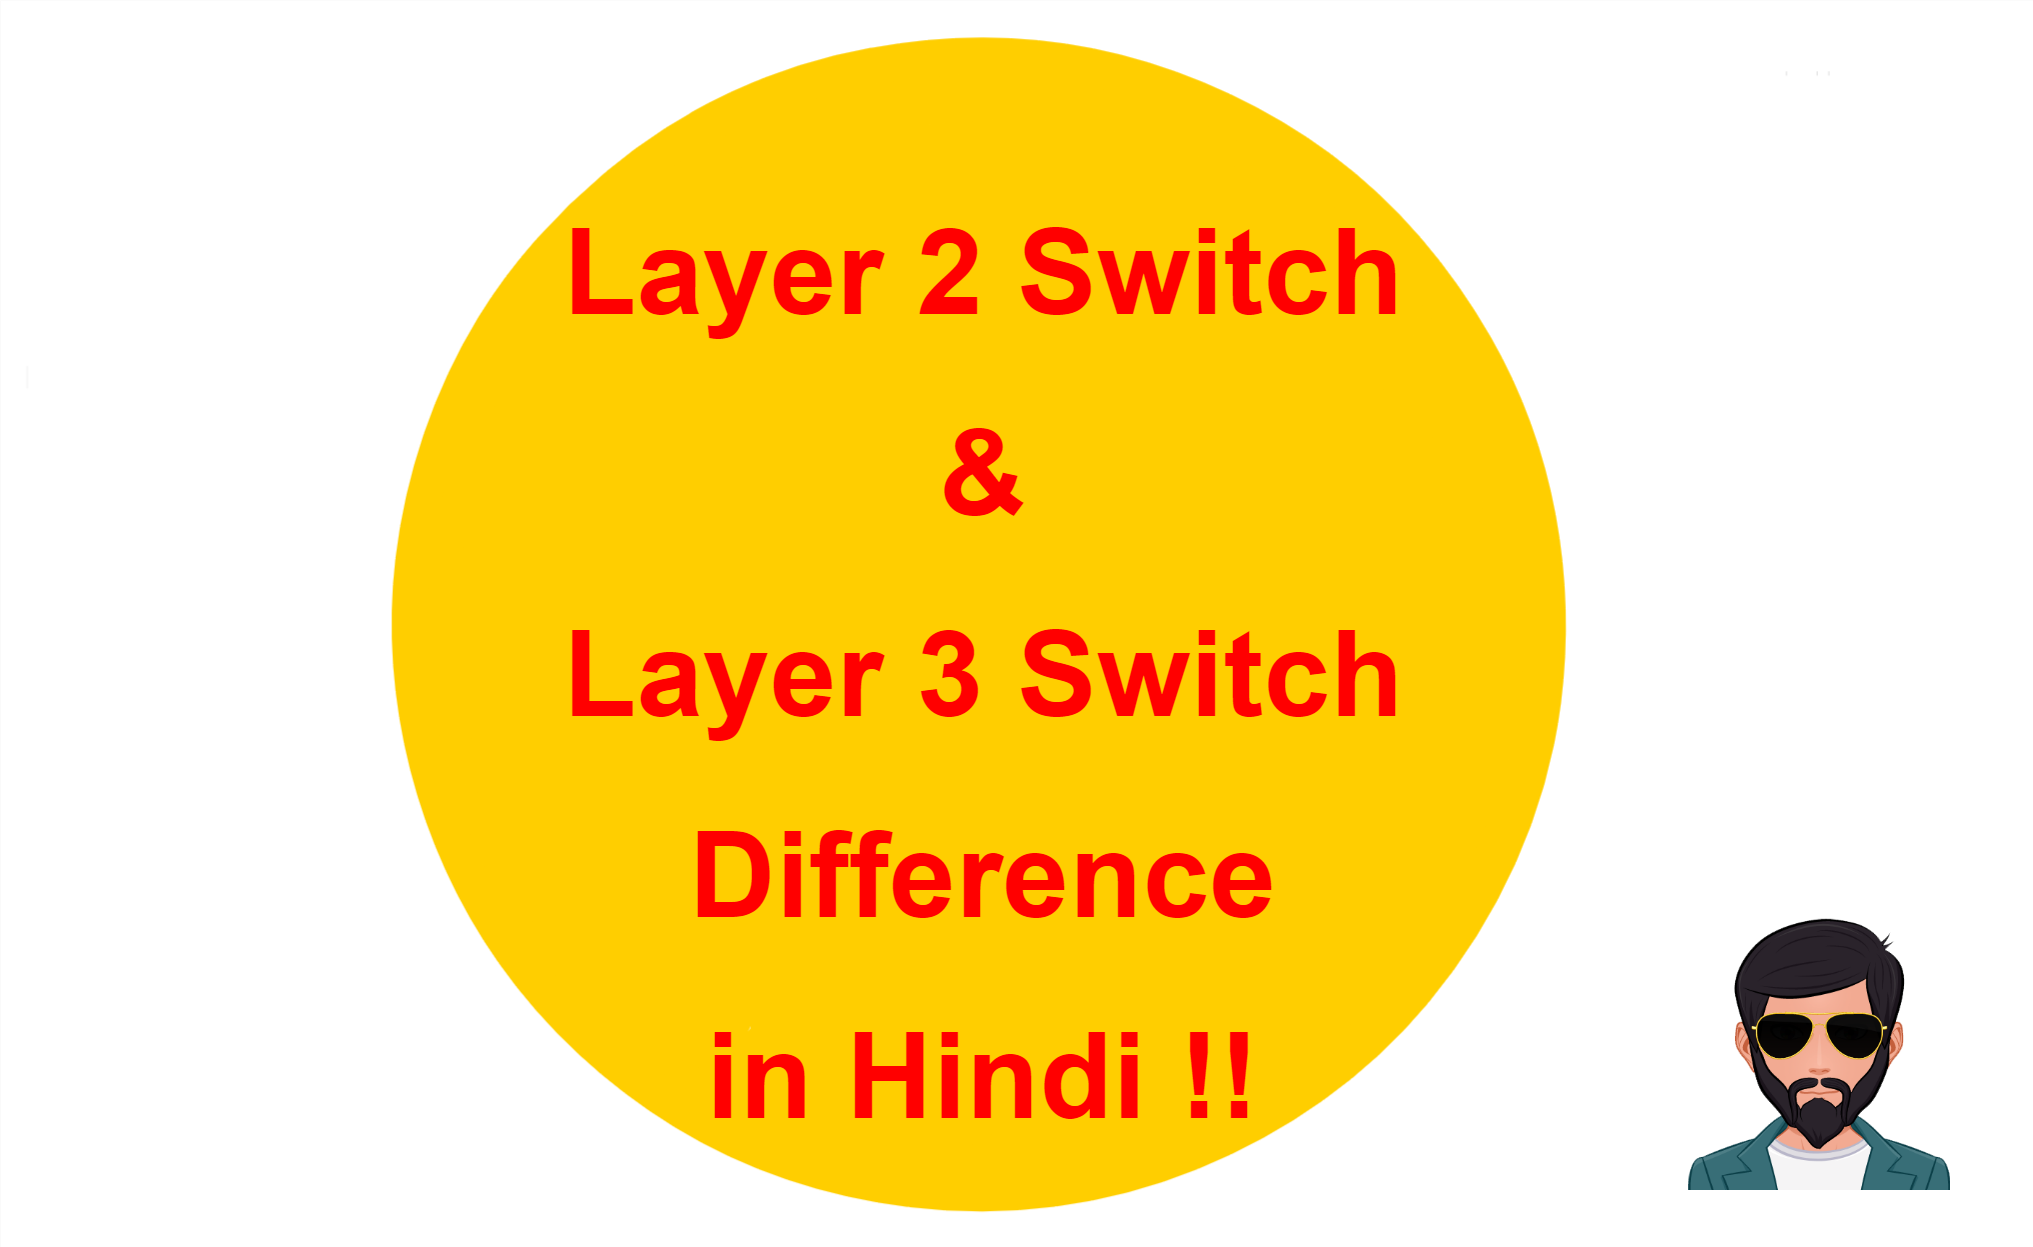 Layer 2 Switch & Layer 3 Switch Difference in Hindi !!